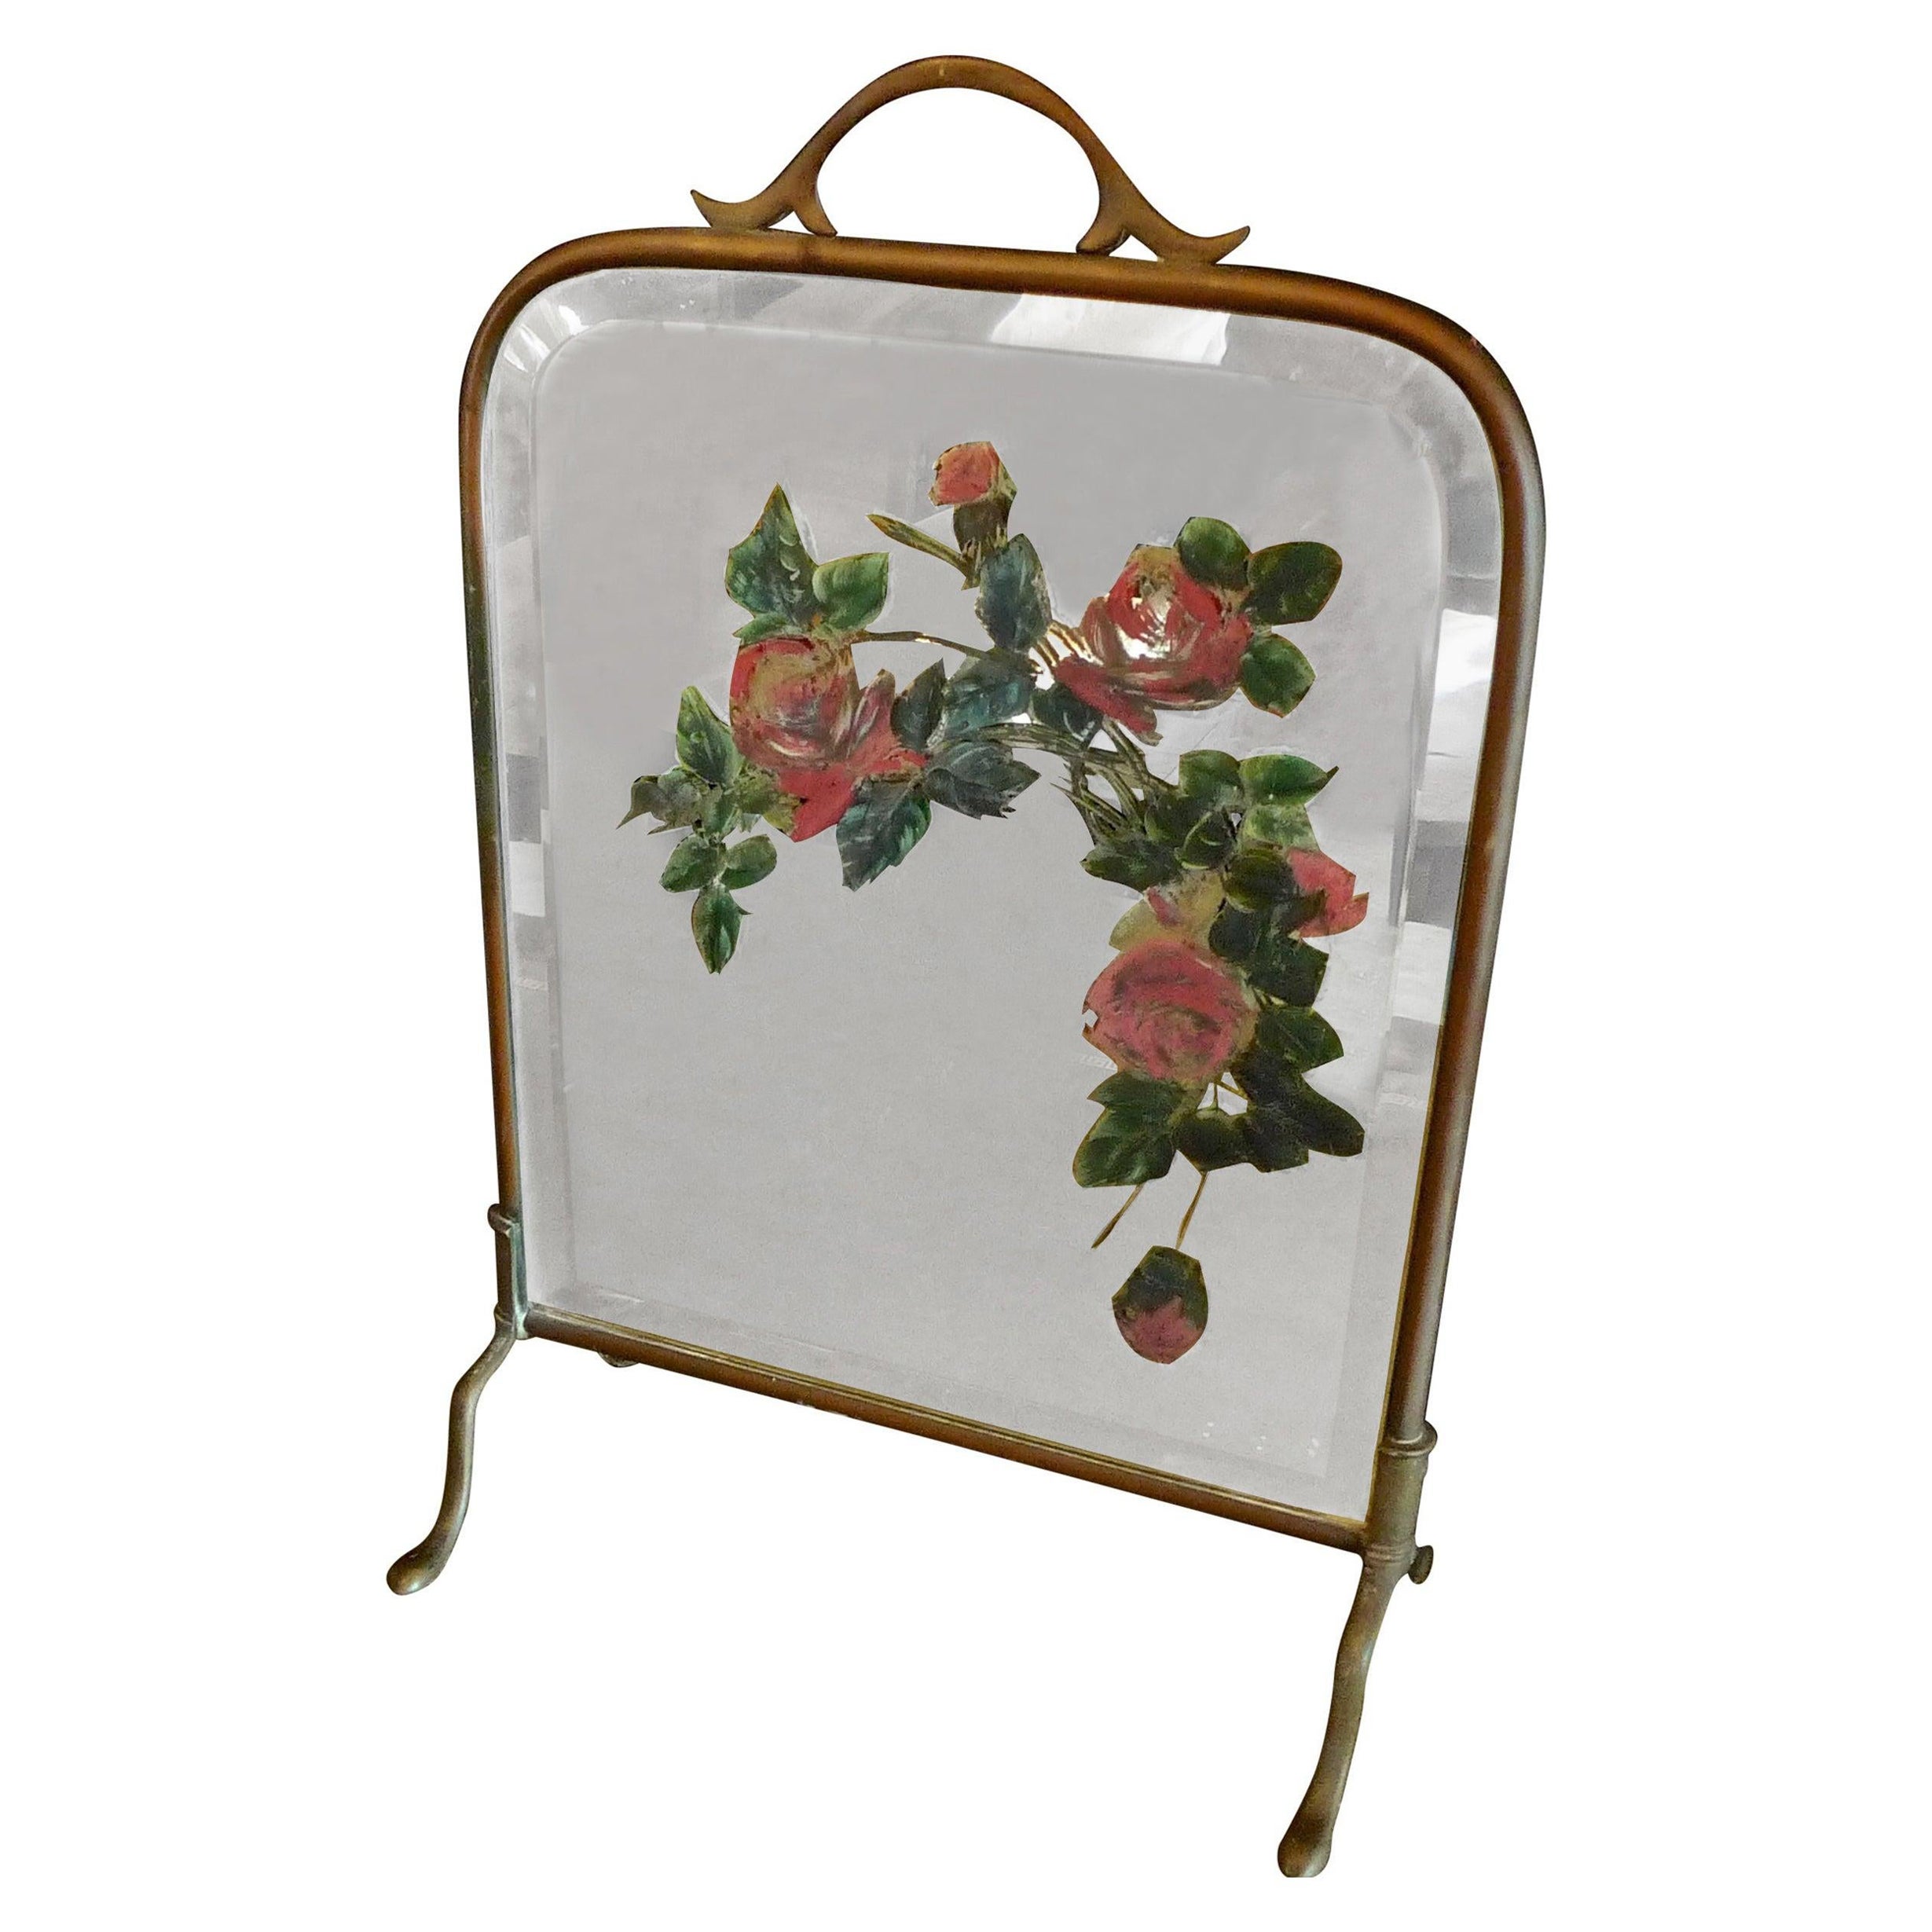 French 1930s Mirrored Fire Screen with Painted Flowers on Beveled Mirror Glass